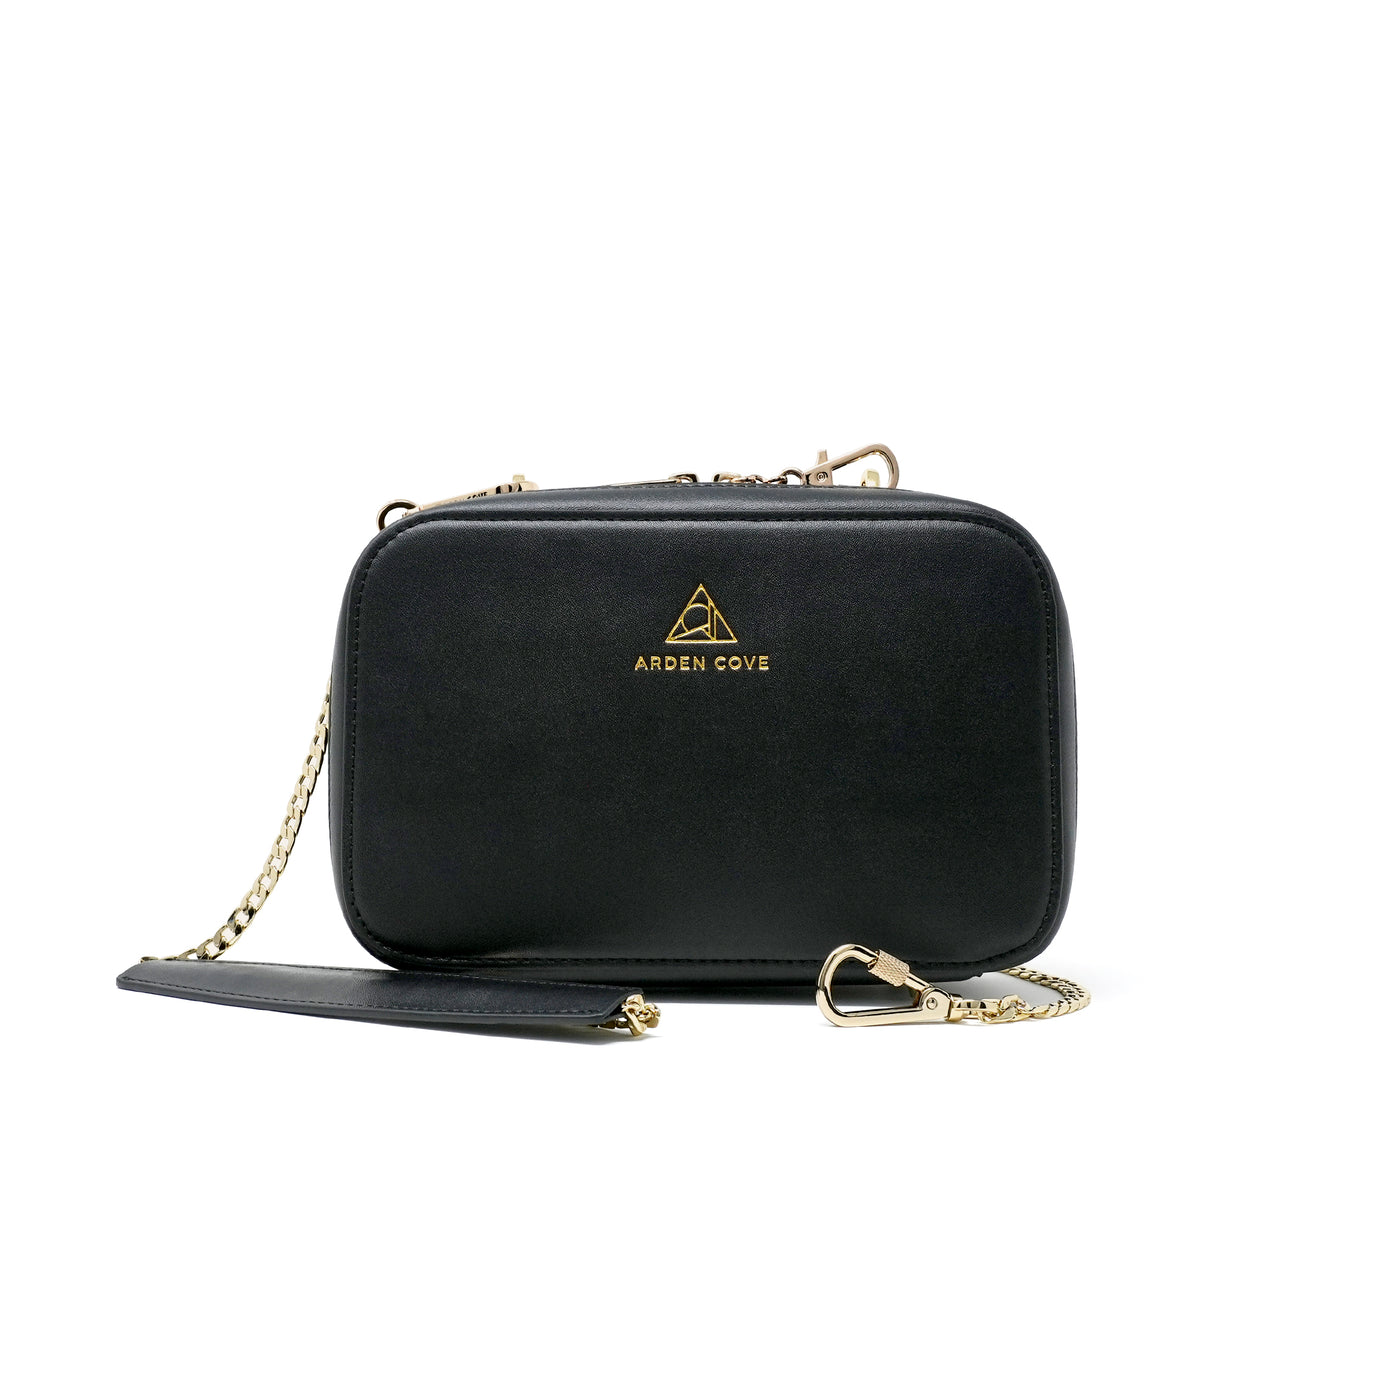 Anti-theft Water-resistant Travel Crossbody - Elise Crossbody in Black Gold with slash-resistant chain & locking clasps straps - front view - Arden Cove